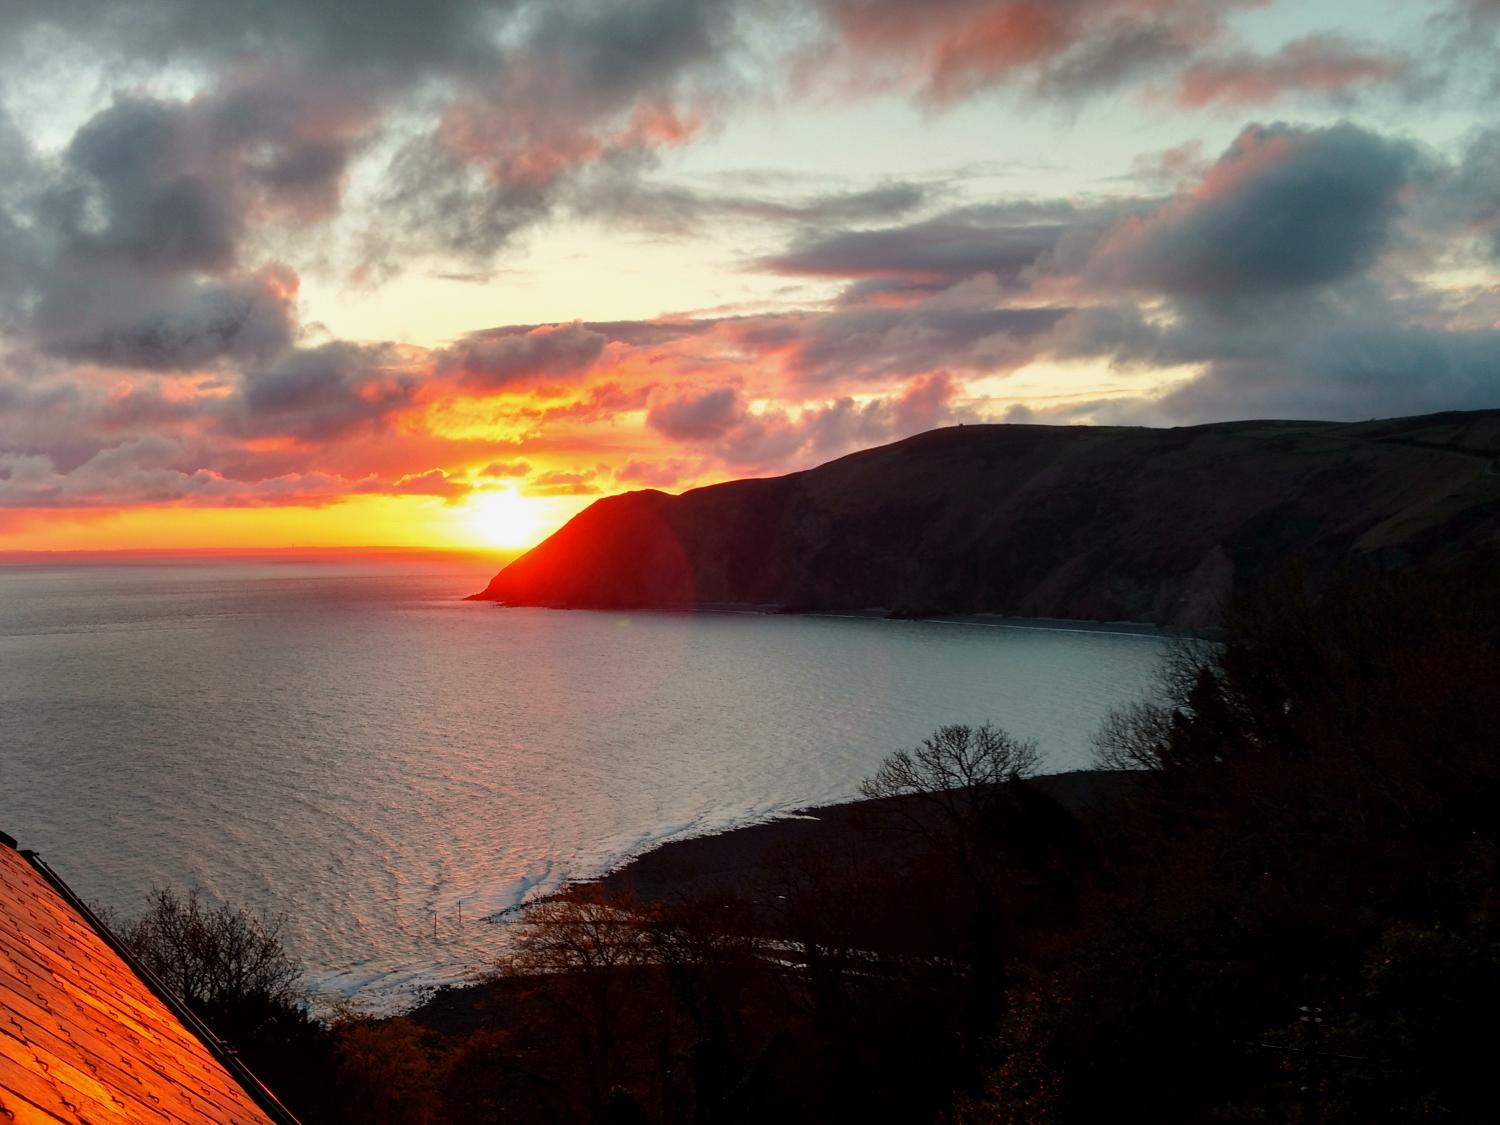 View of the sunrise from Chough's Nest Hotel